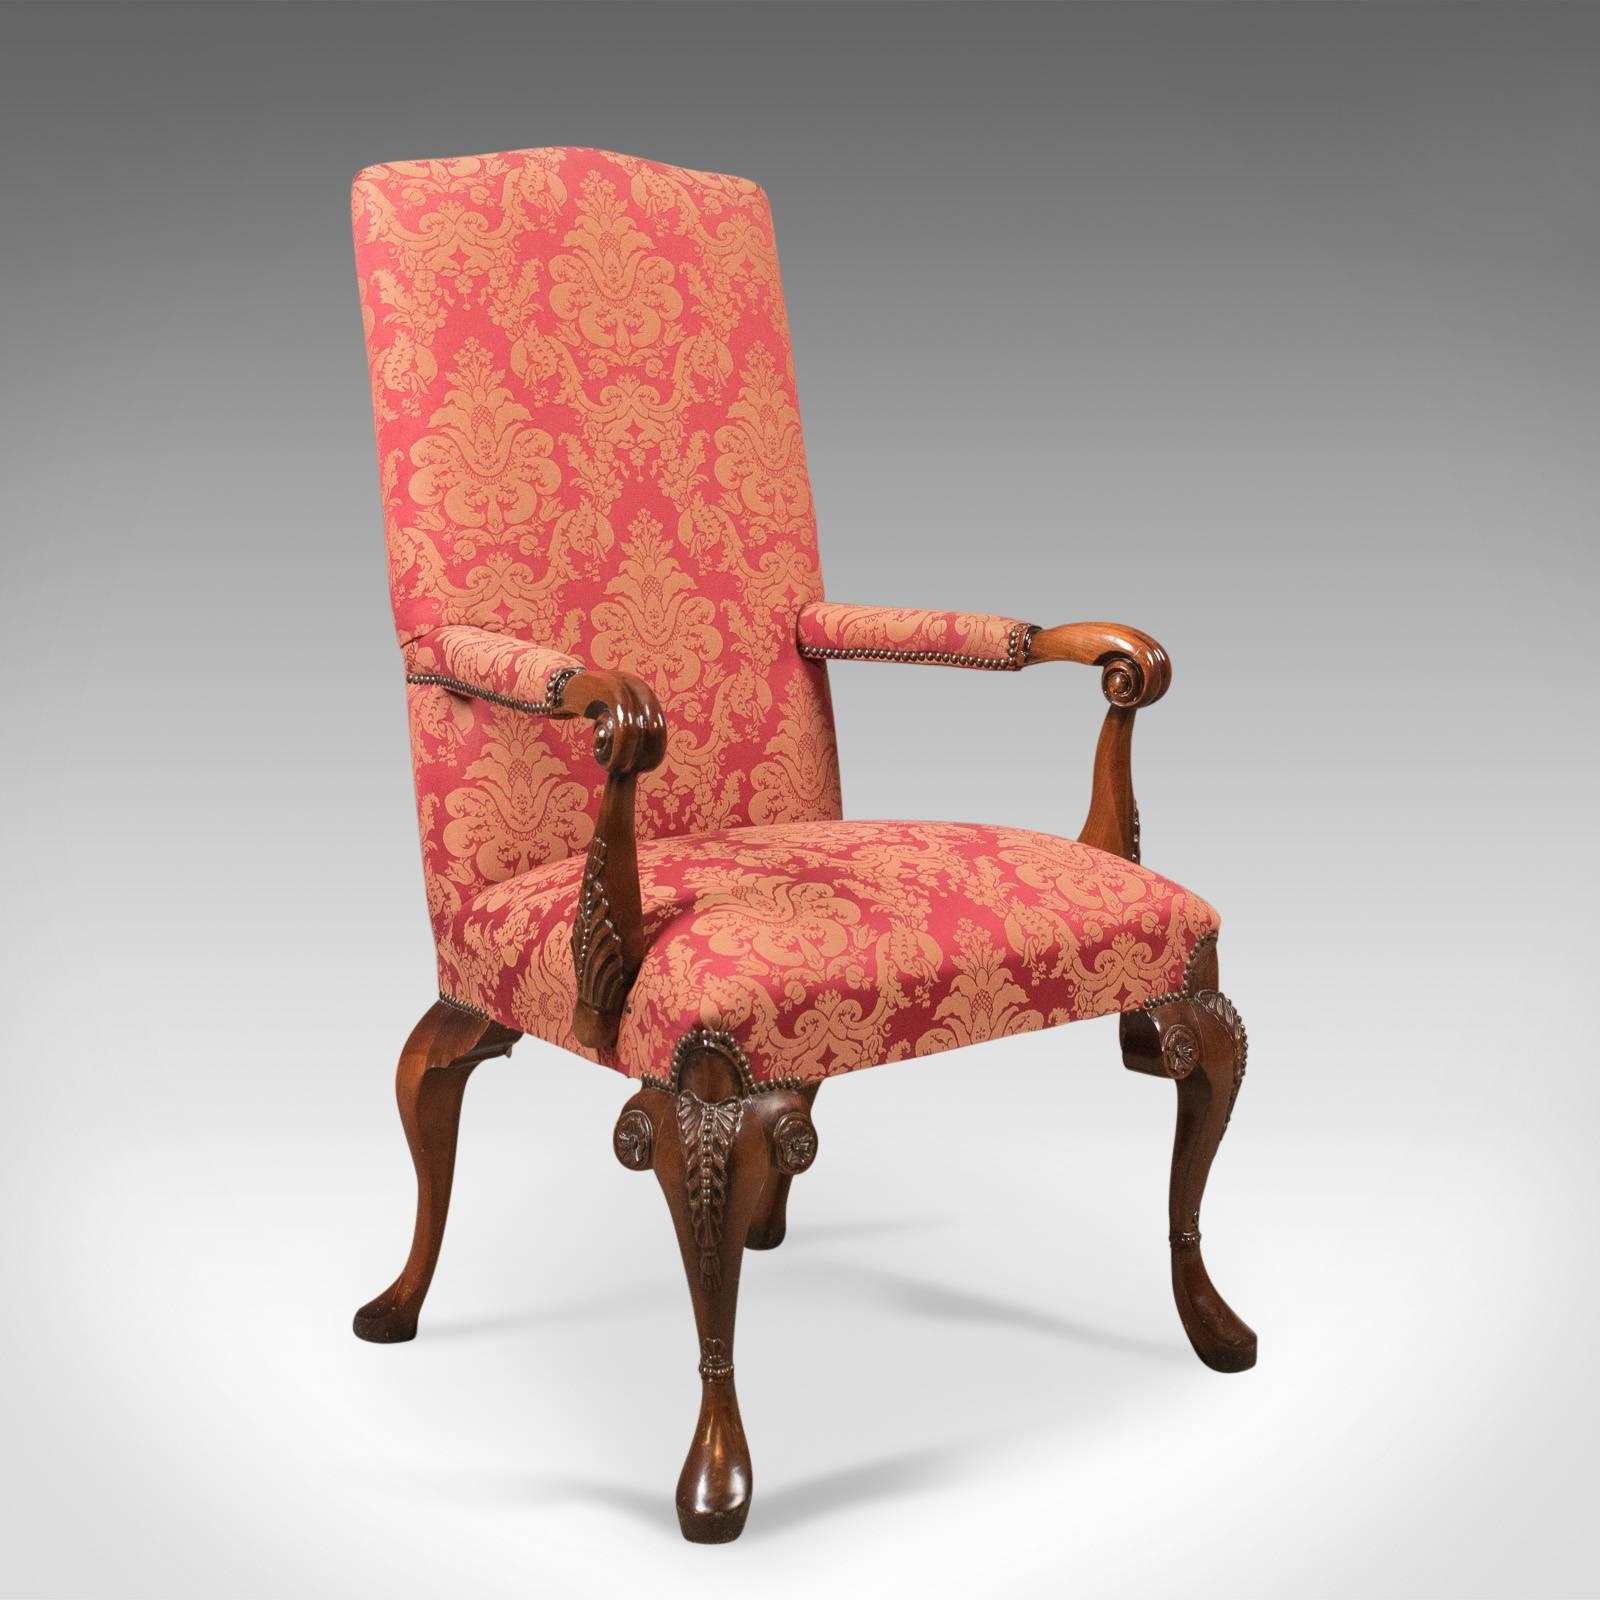 Contemporary Set of Ten Upholstered Dining Chairs in Early 18th Century Manner, 20th Century